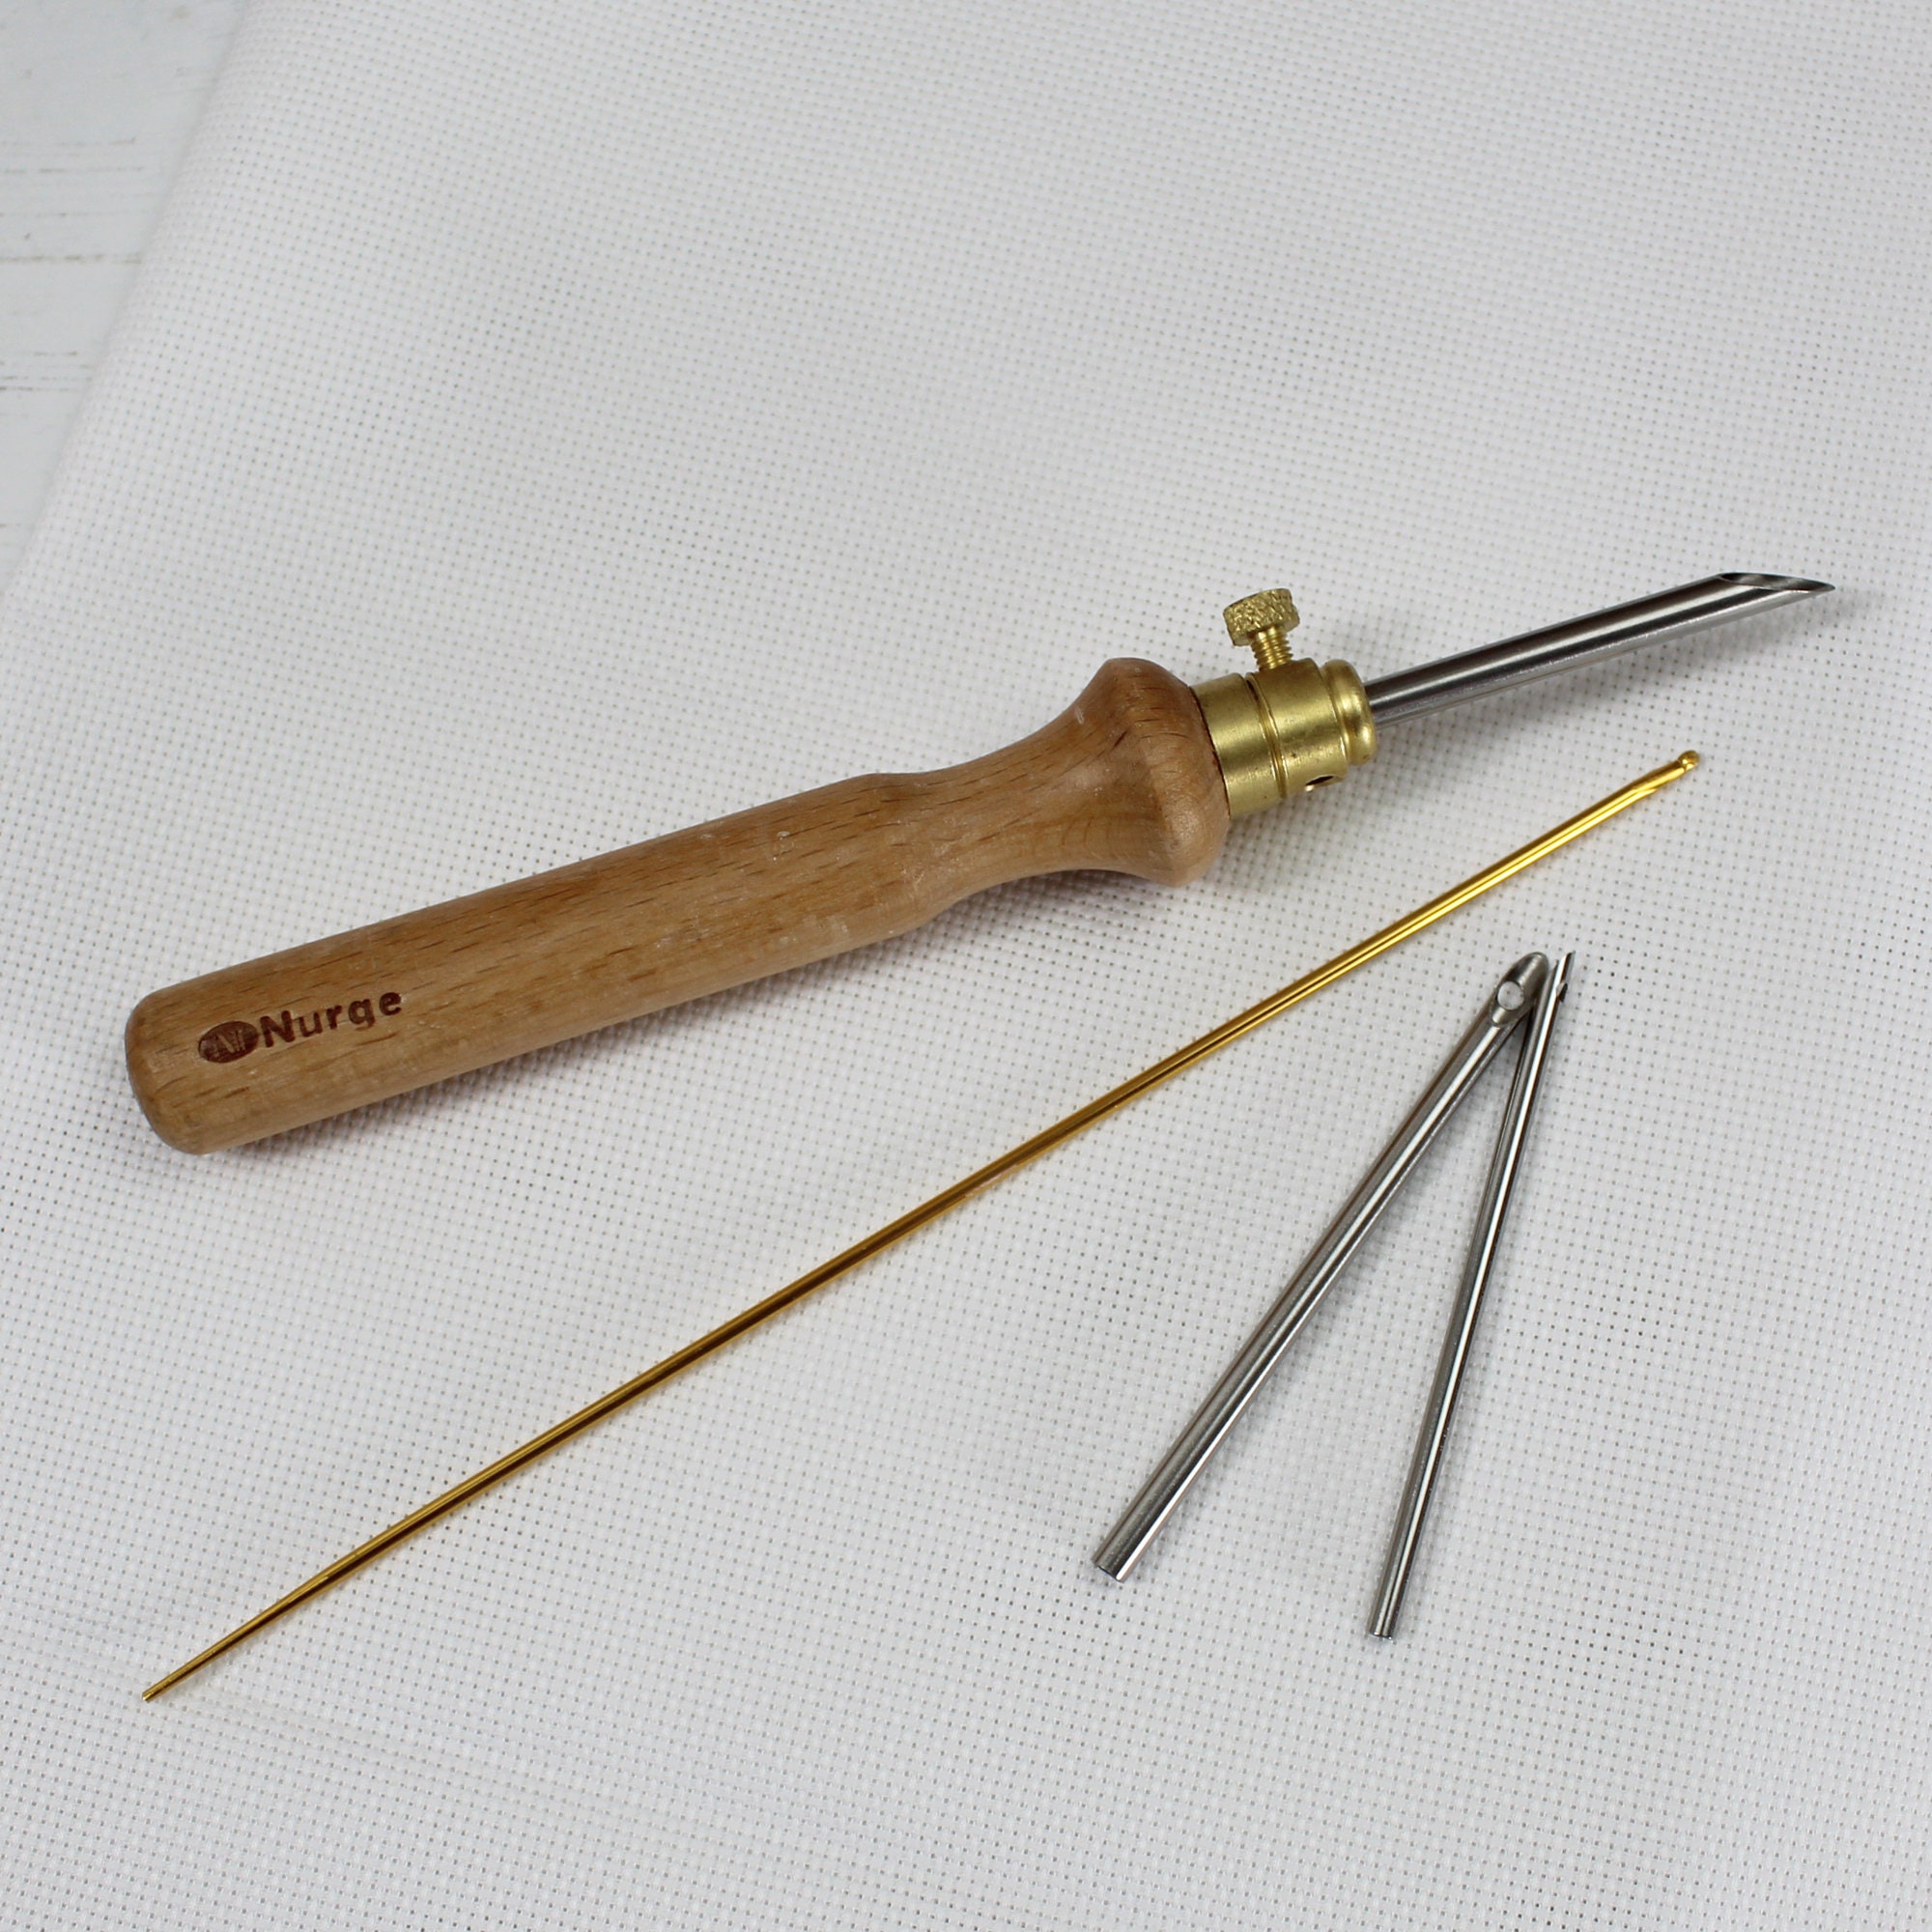 Lavor Embroidery Punch Needle Tool Set 3 Sizes 2mm 2.5mm 3mm With Long  Threader 